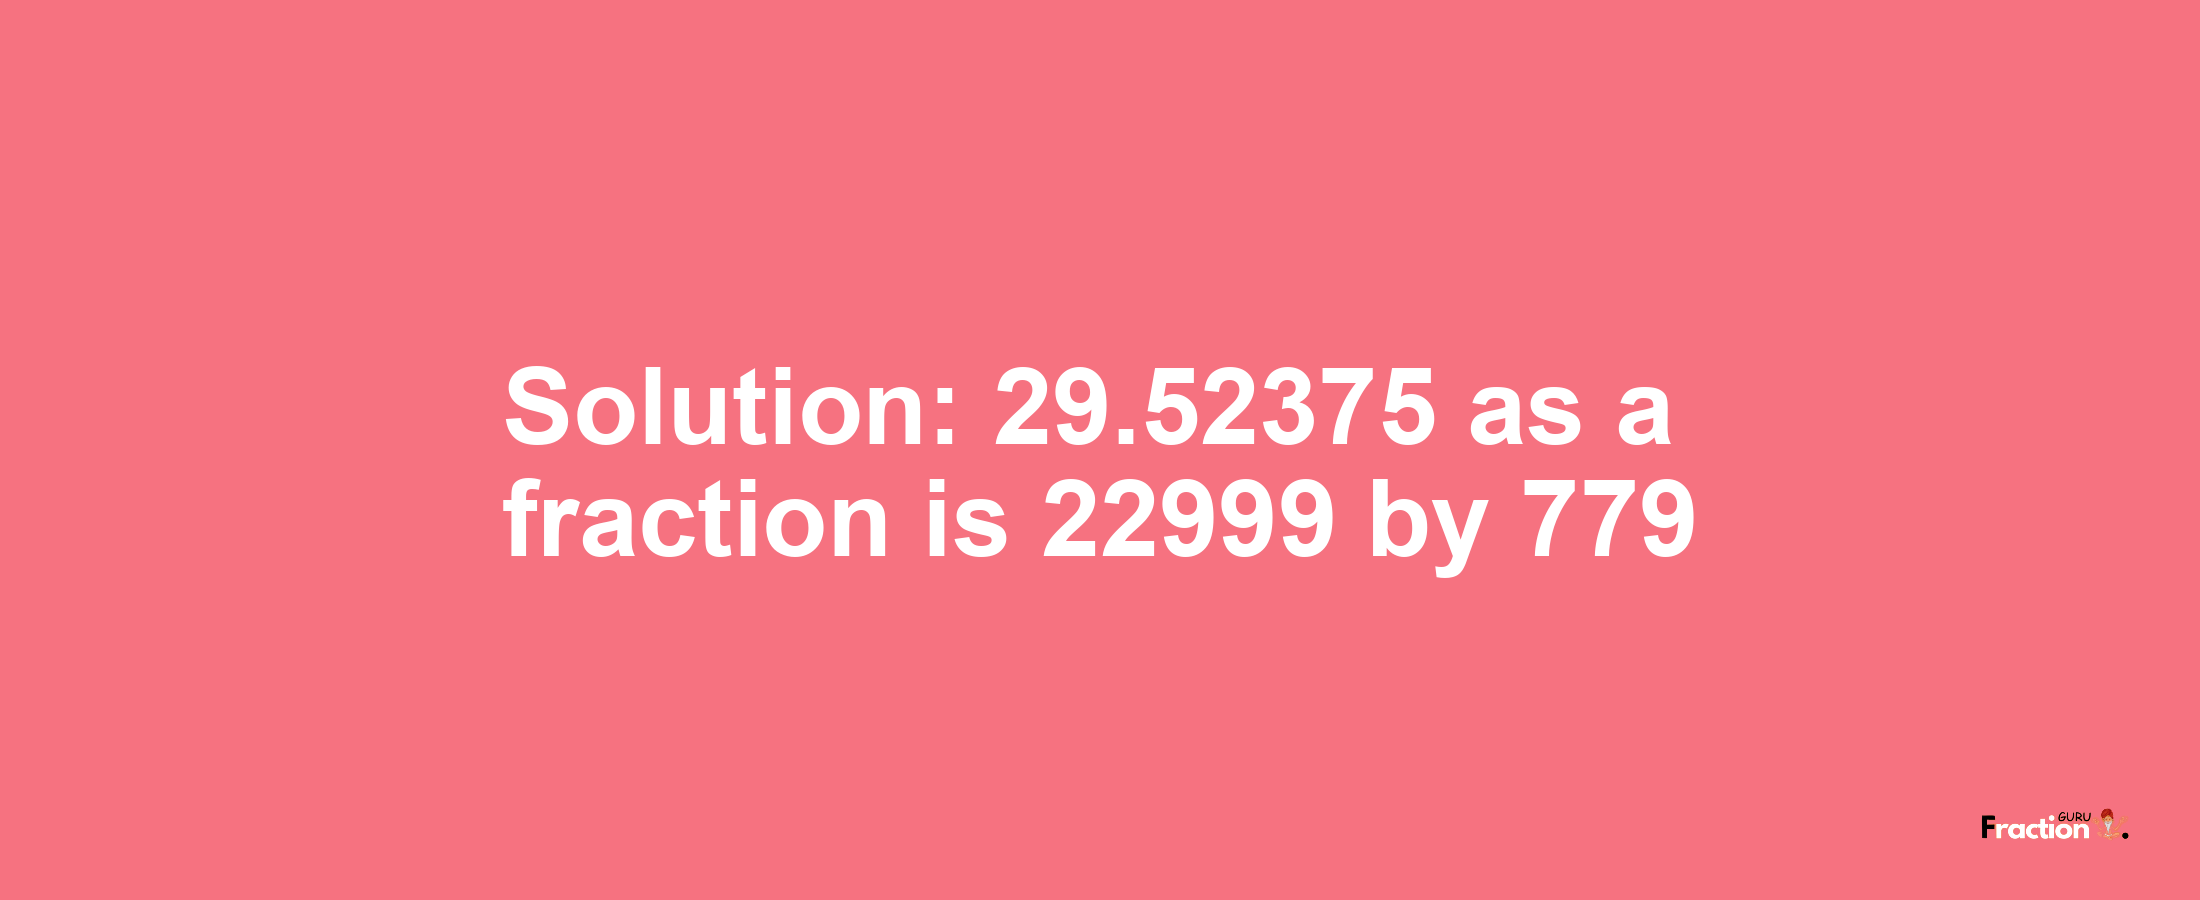 Solution:29.52375 as a fraction is 22999/779